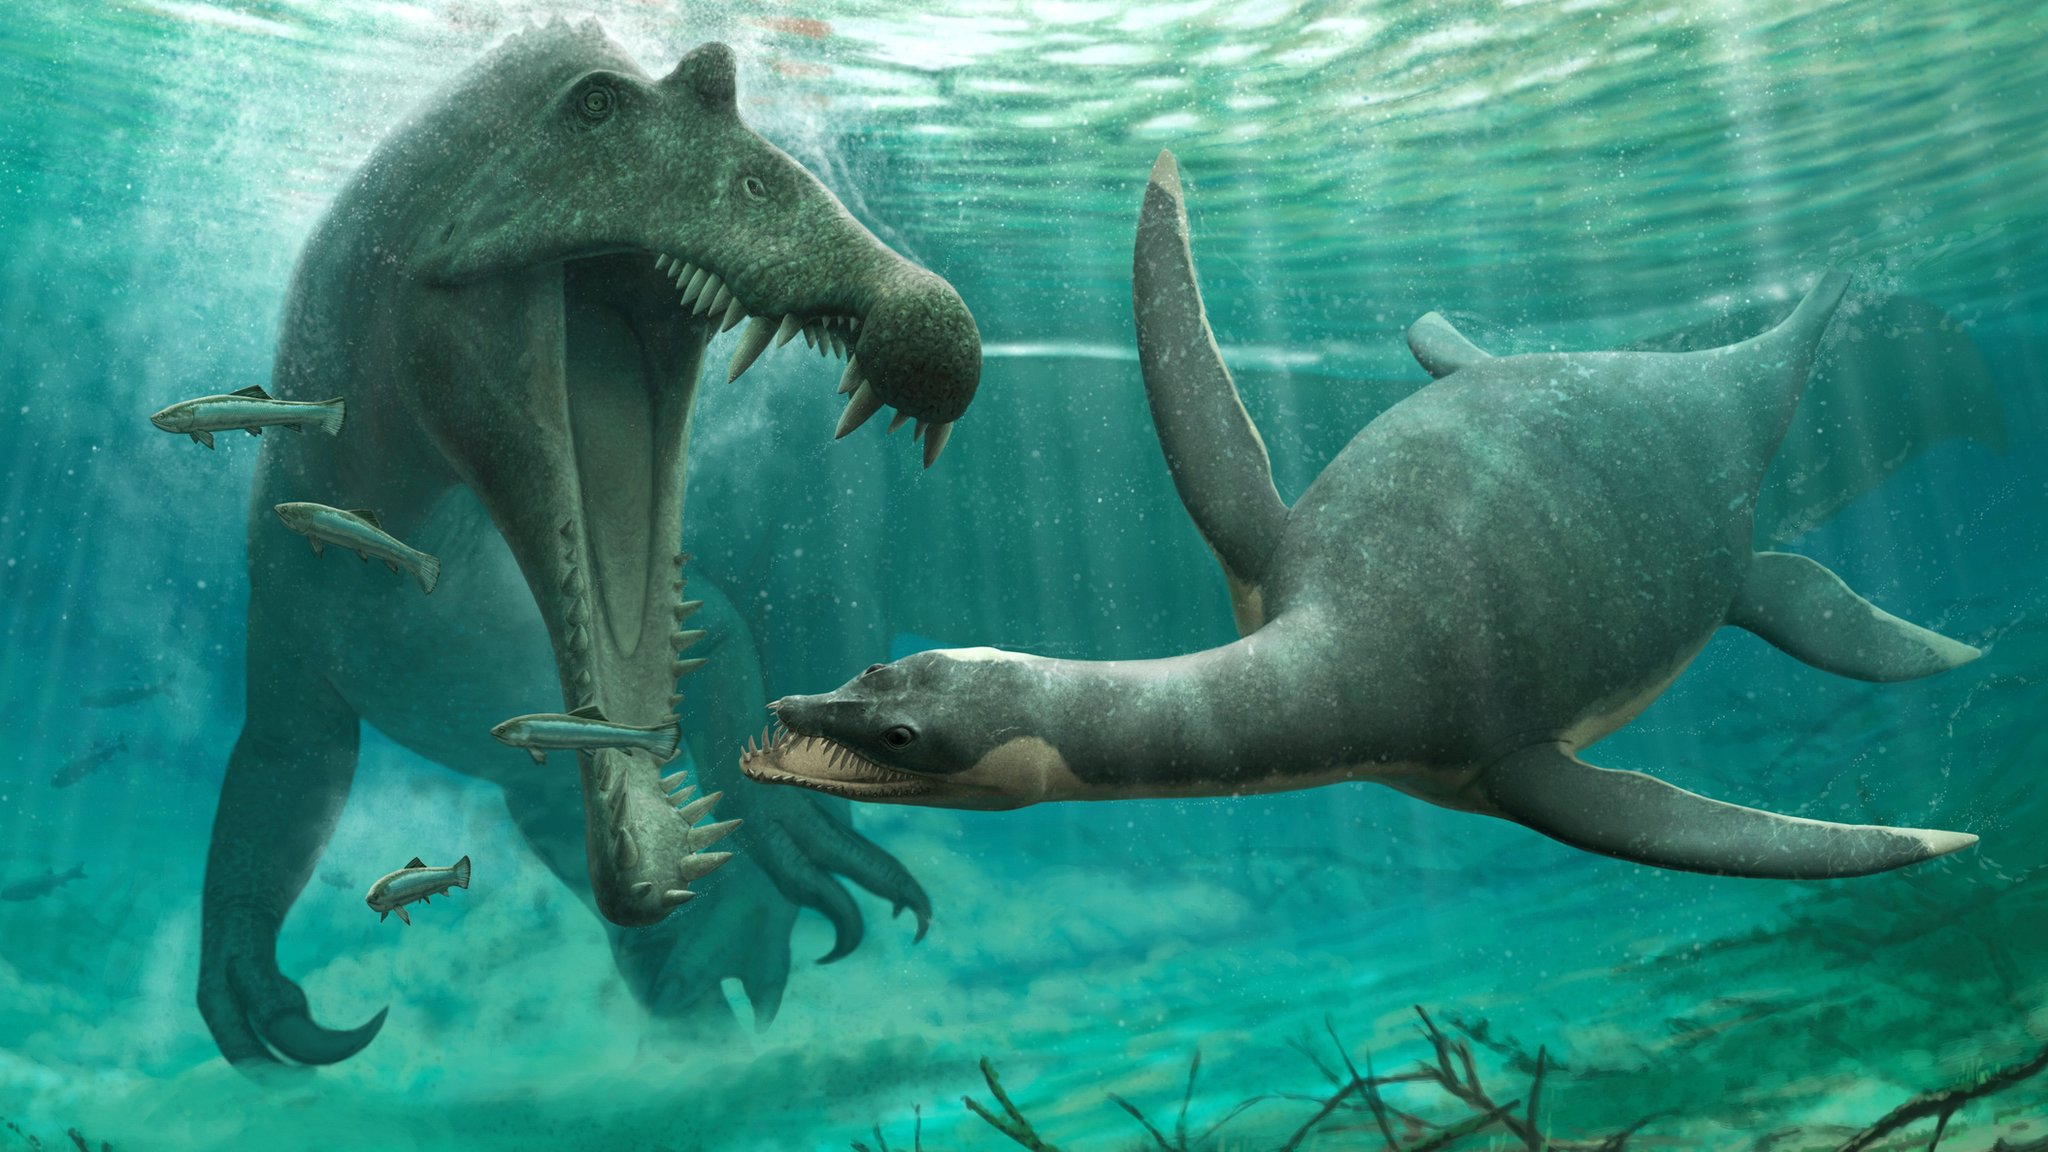 African fossils show monster could have lived in loch ness